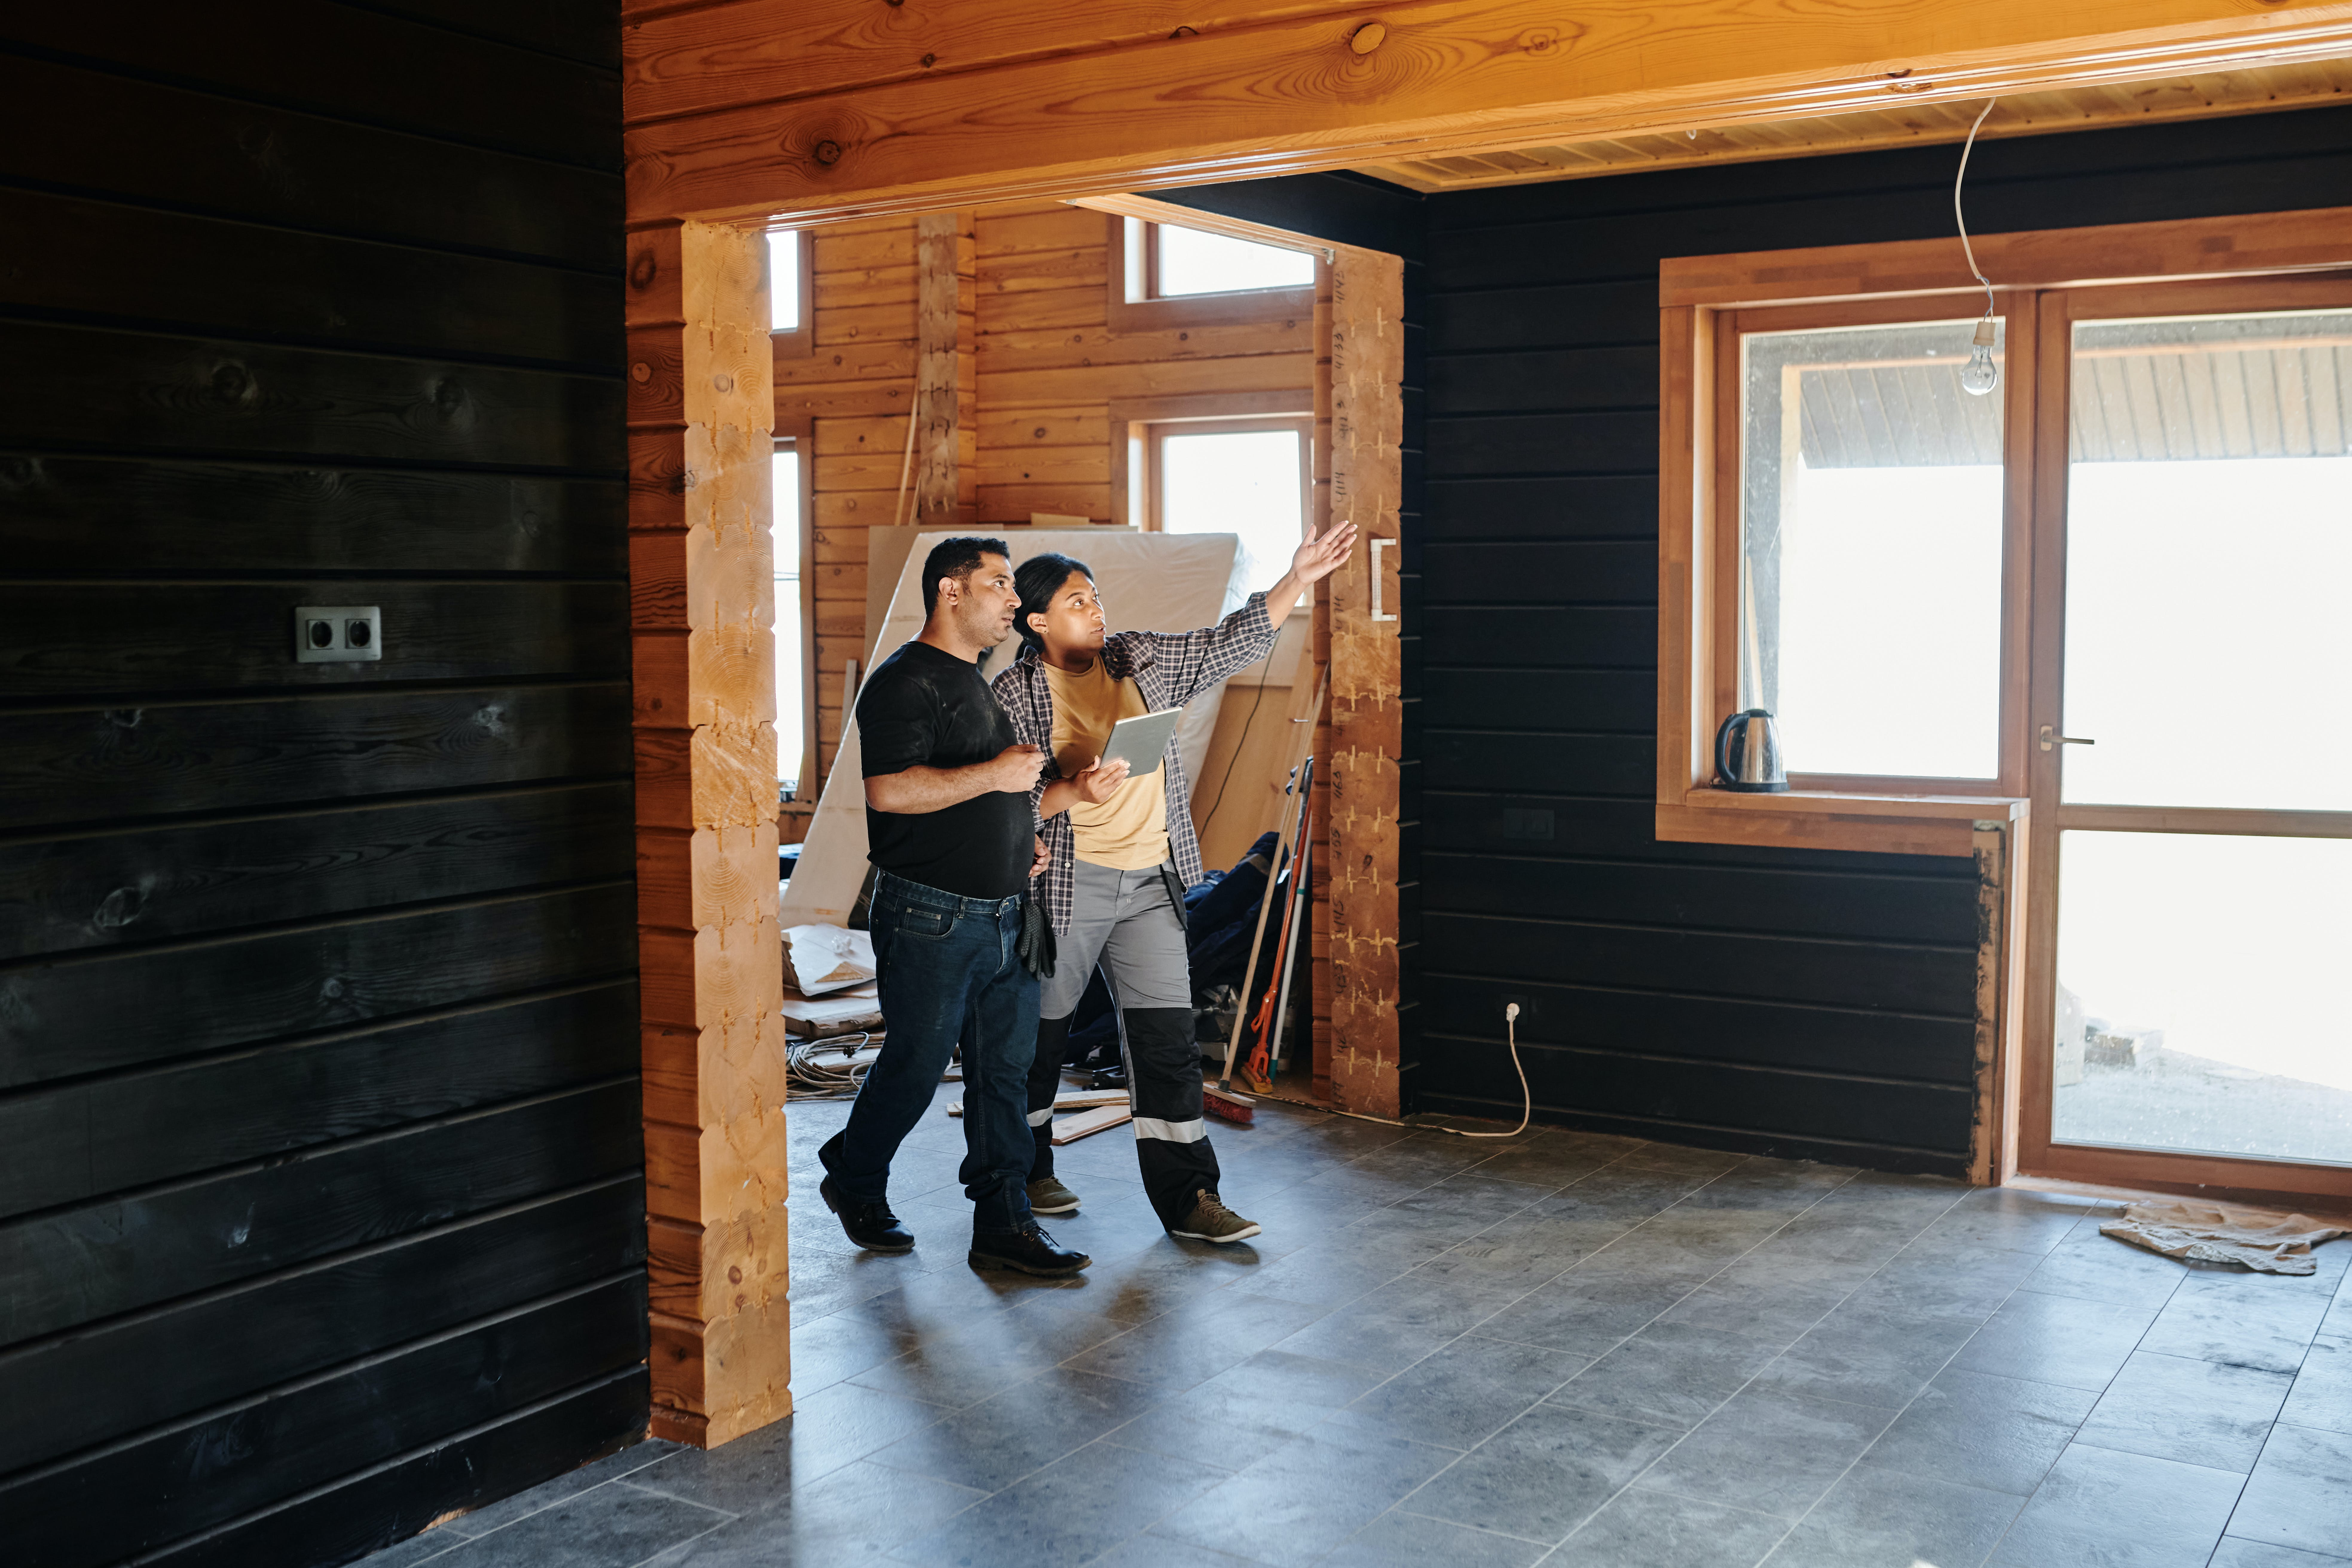 Transforming Spaces The Art and Science of Remodeling and Construction